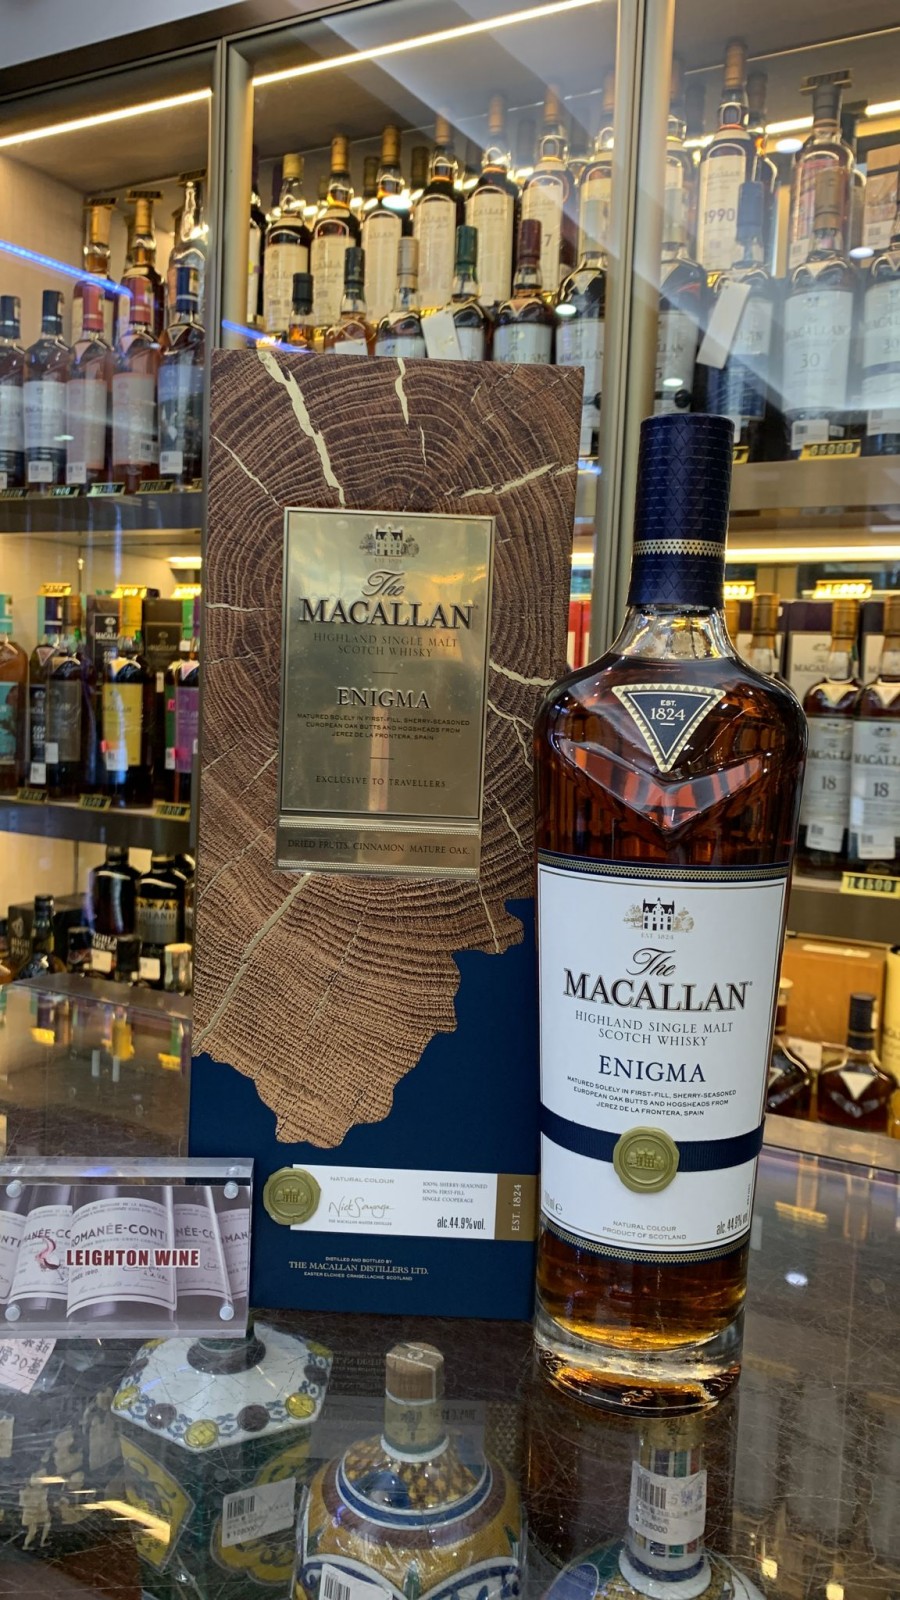 The Macallan Enigma (70cl, 44.9%)